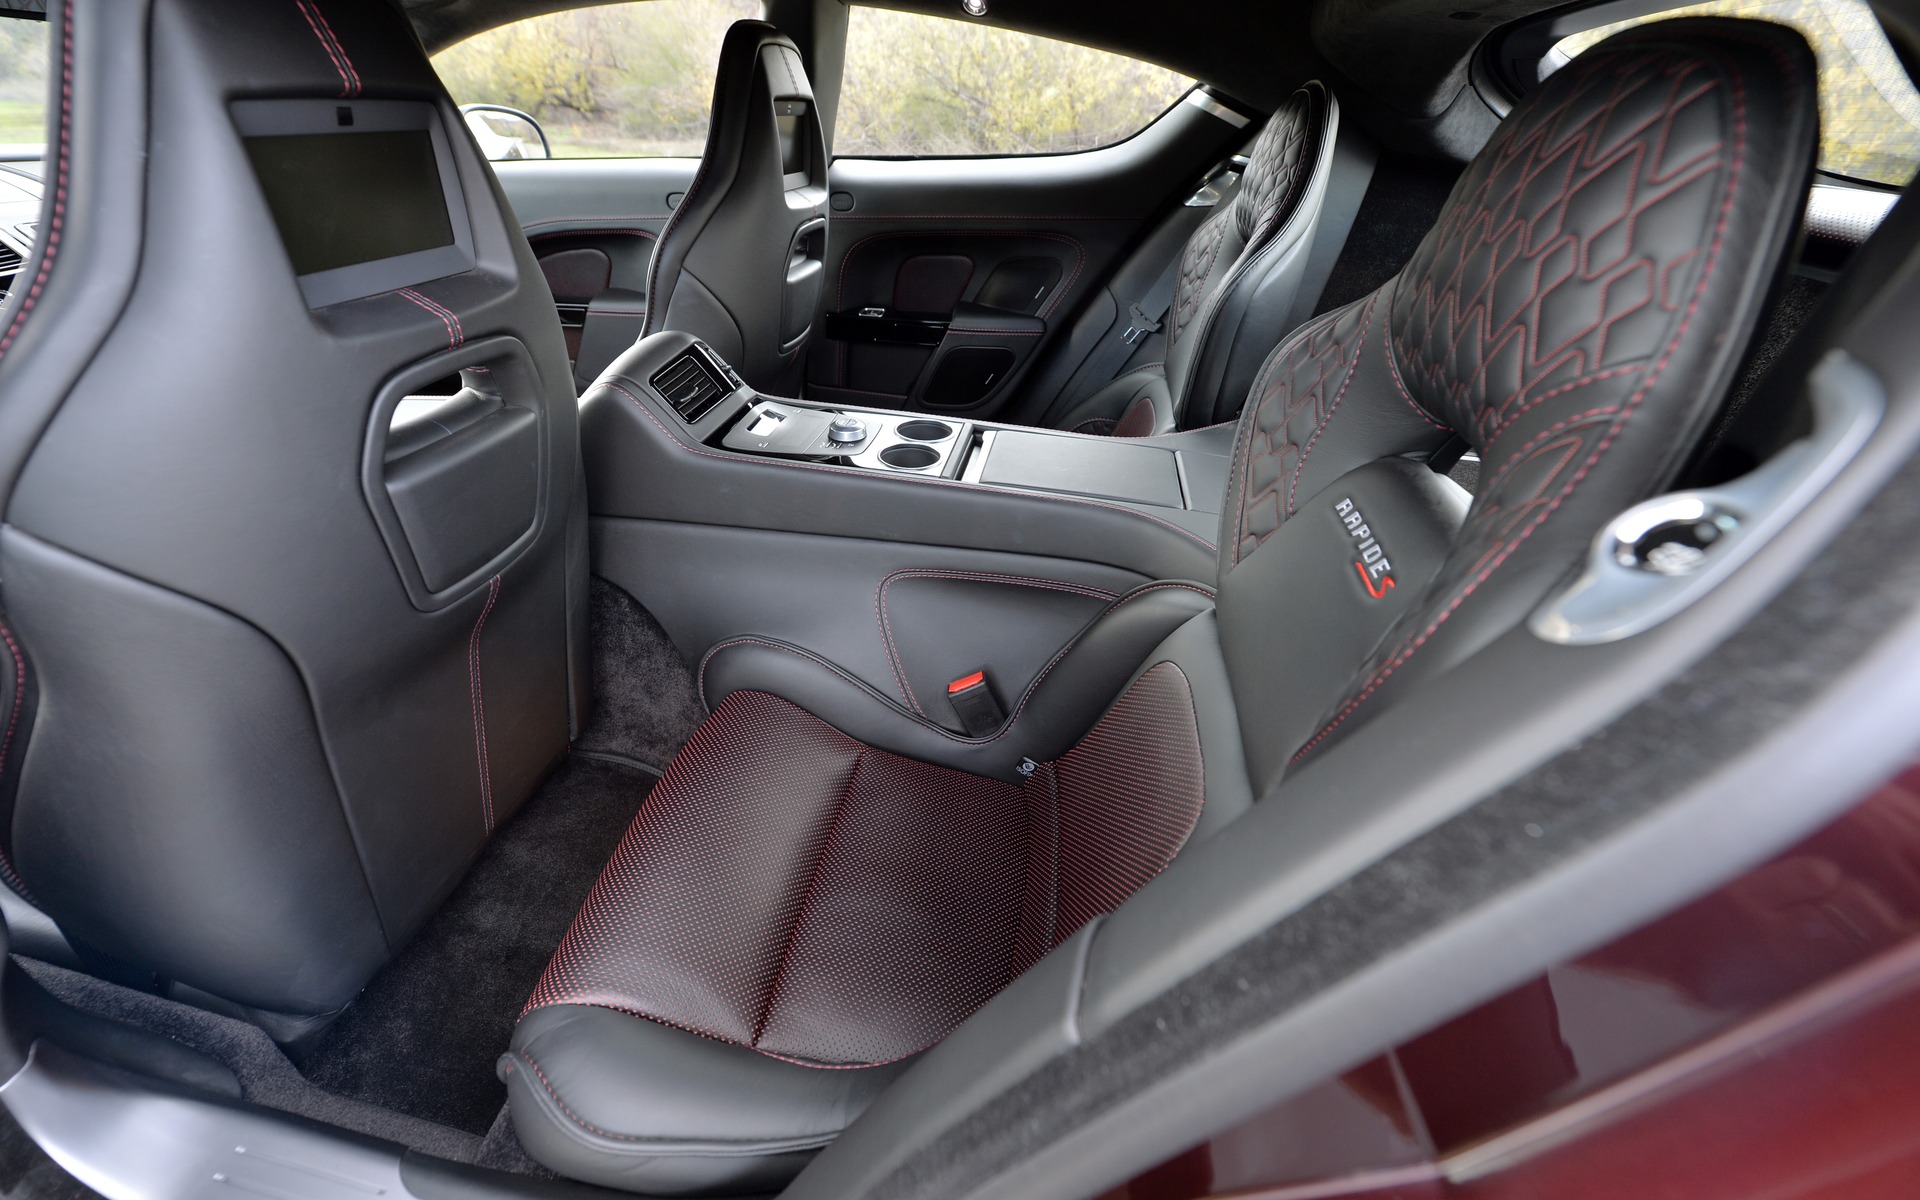 The rear seats in the Rapide S are tight; nothing like other luxury sedans.